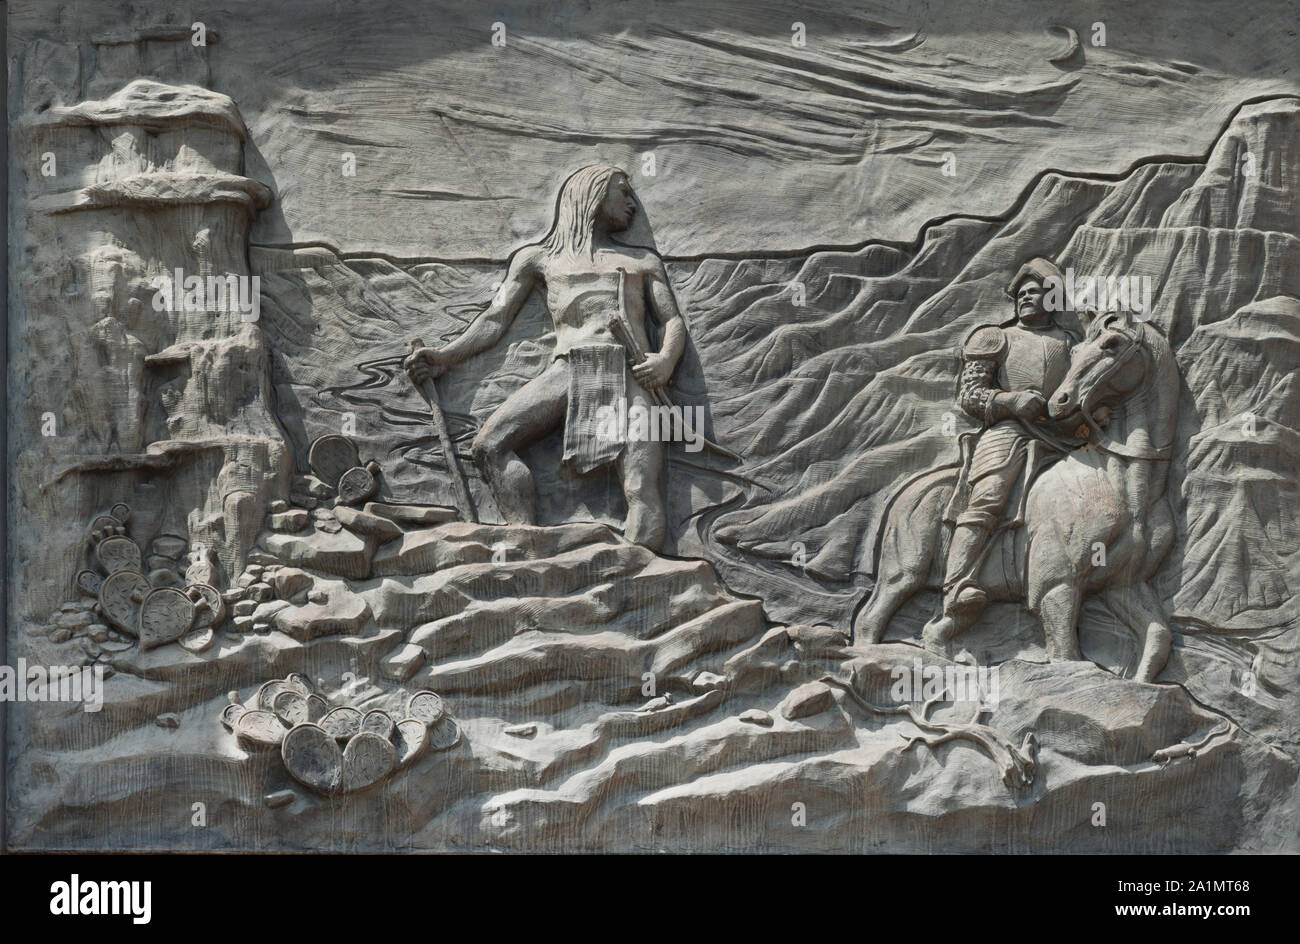 One of six 11-by-16-foot concrete panels portraying a moment in Texas history on the wall of the Bob Bullock State History Museum in Austin, Texas Stock Photo